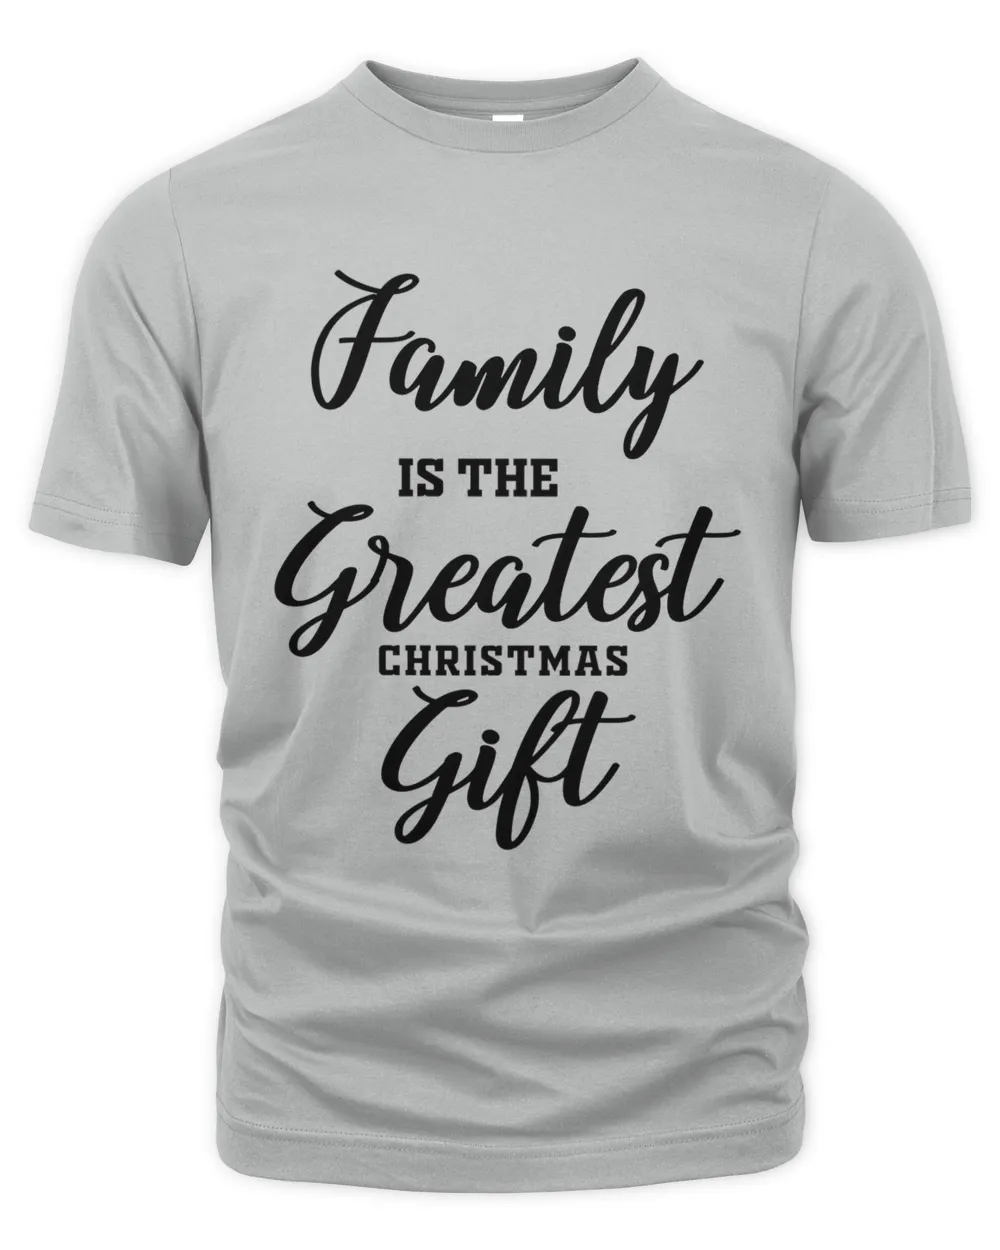 Family Is The Greatest Christmas Gift, Christmas T-Shirts for the Family, Men's & Women's Merry Christmas Shirt